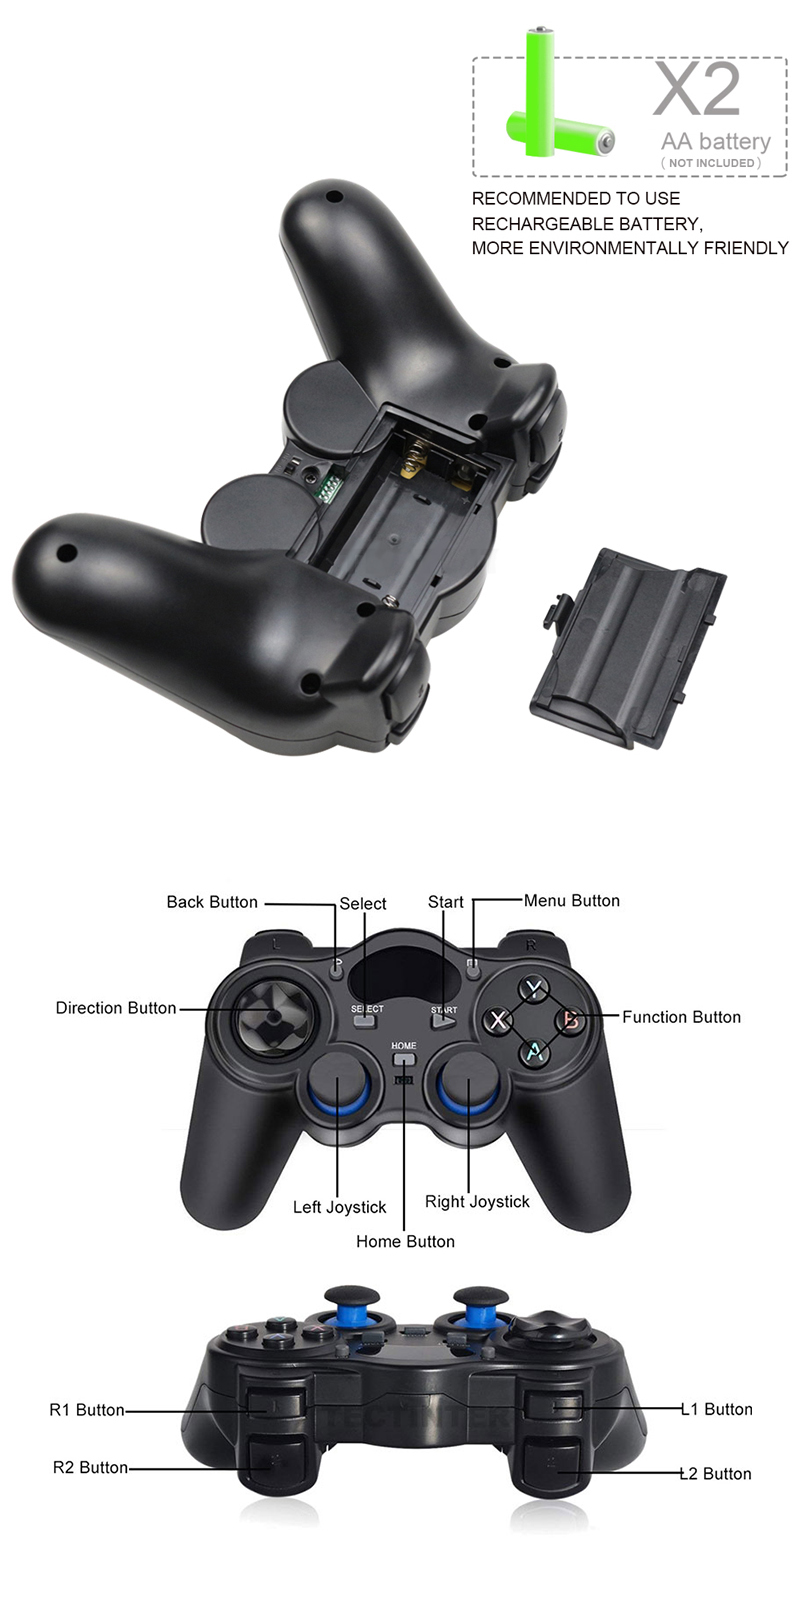 Bakeey-24G-Wireless-Game-Controller-Gamepad-Joystick-Joypad-for-PS3-for-Android-TV-Box-Tablets-1867145-5